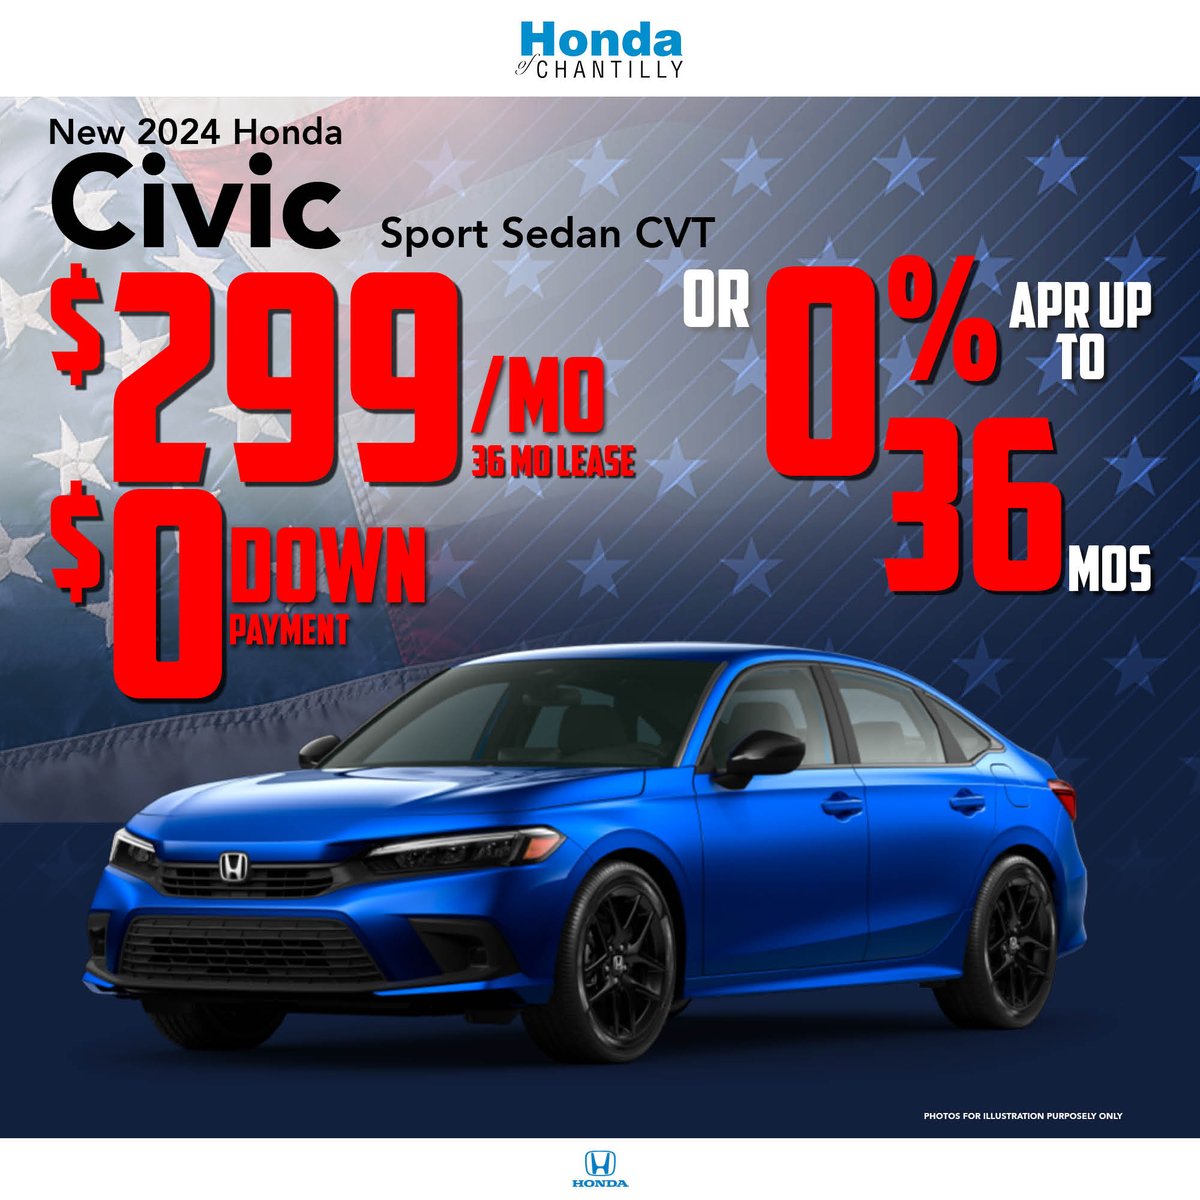 Get the 2024 Honda Civic Sport Sedan for $299 a month with a 36 month + $0 down payment or 0% APR for up to 36 months!

Don't wait! These deals won't last!

Shop now: bit.ly/3xNx4ER

#ilovepohanka #hondaofchantilly #chantillyva #sales #apr